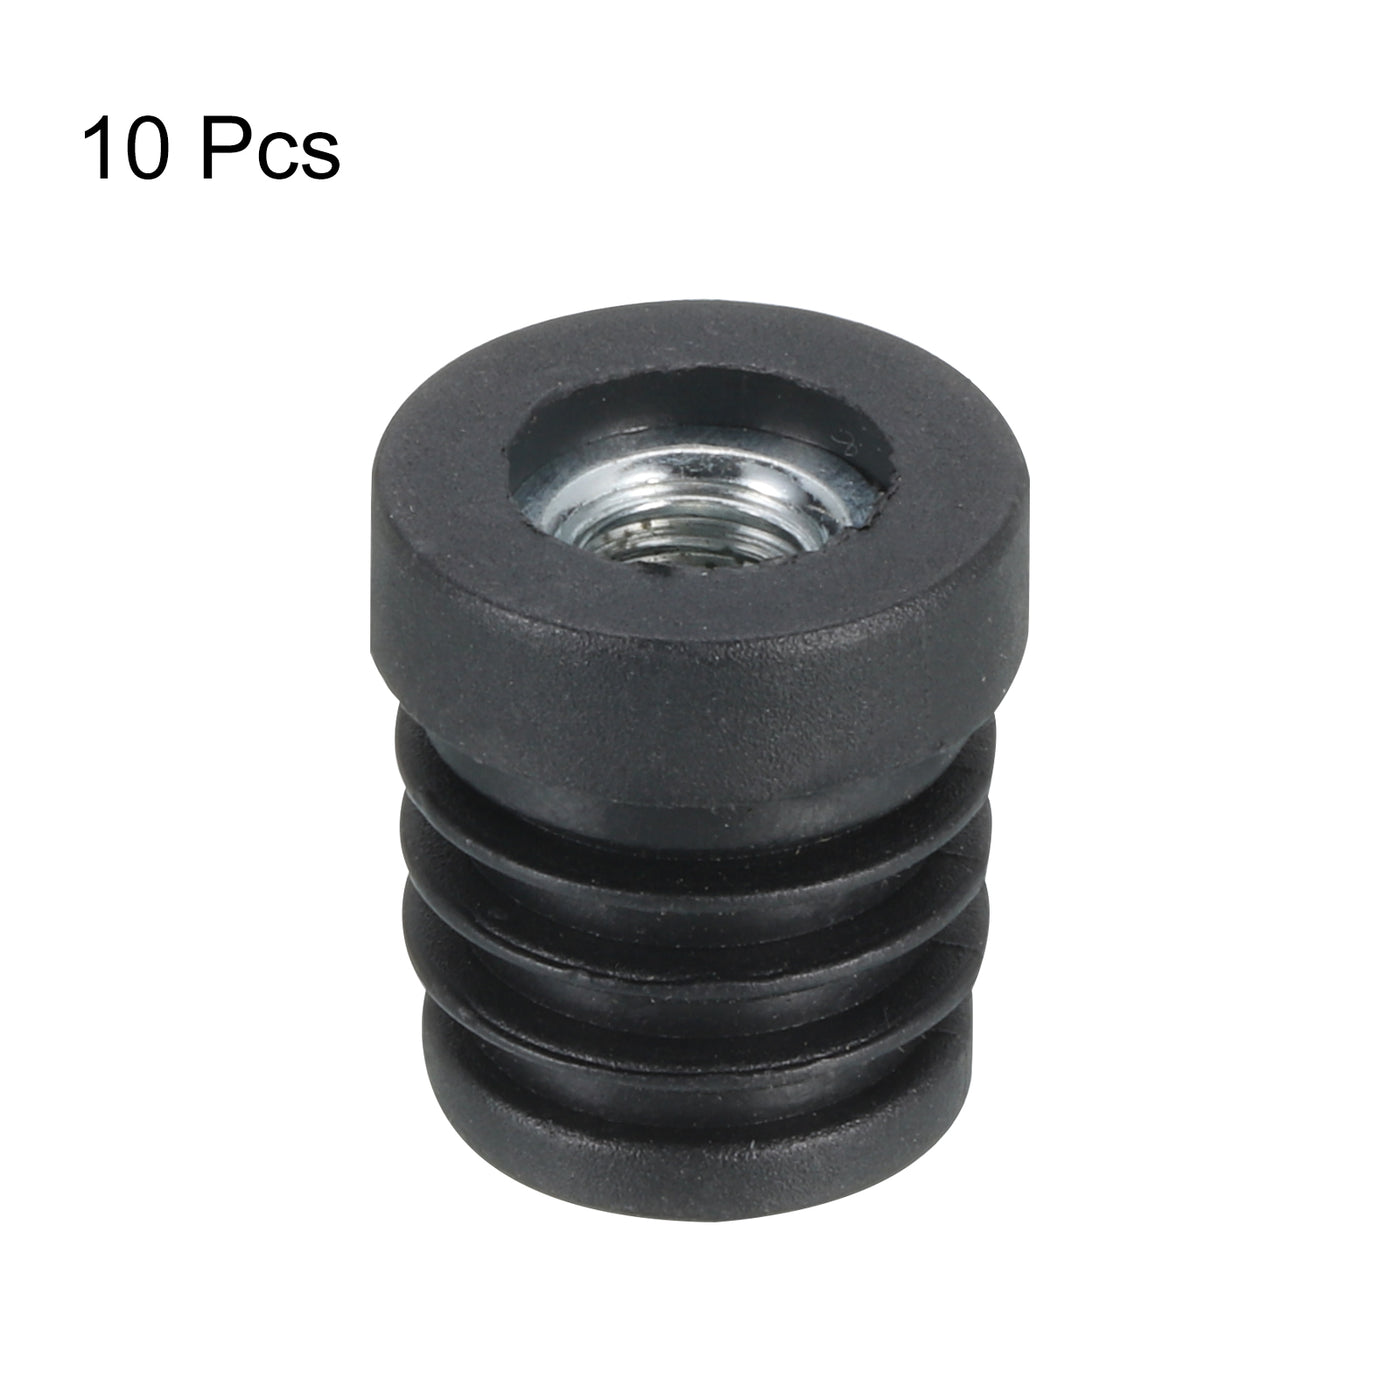 uxcell Uxcell 10Pcs Caster Insert with Thread, 19mm/0.75" M8 Thread for Furniture